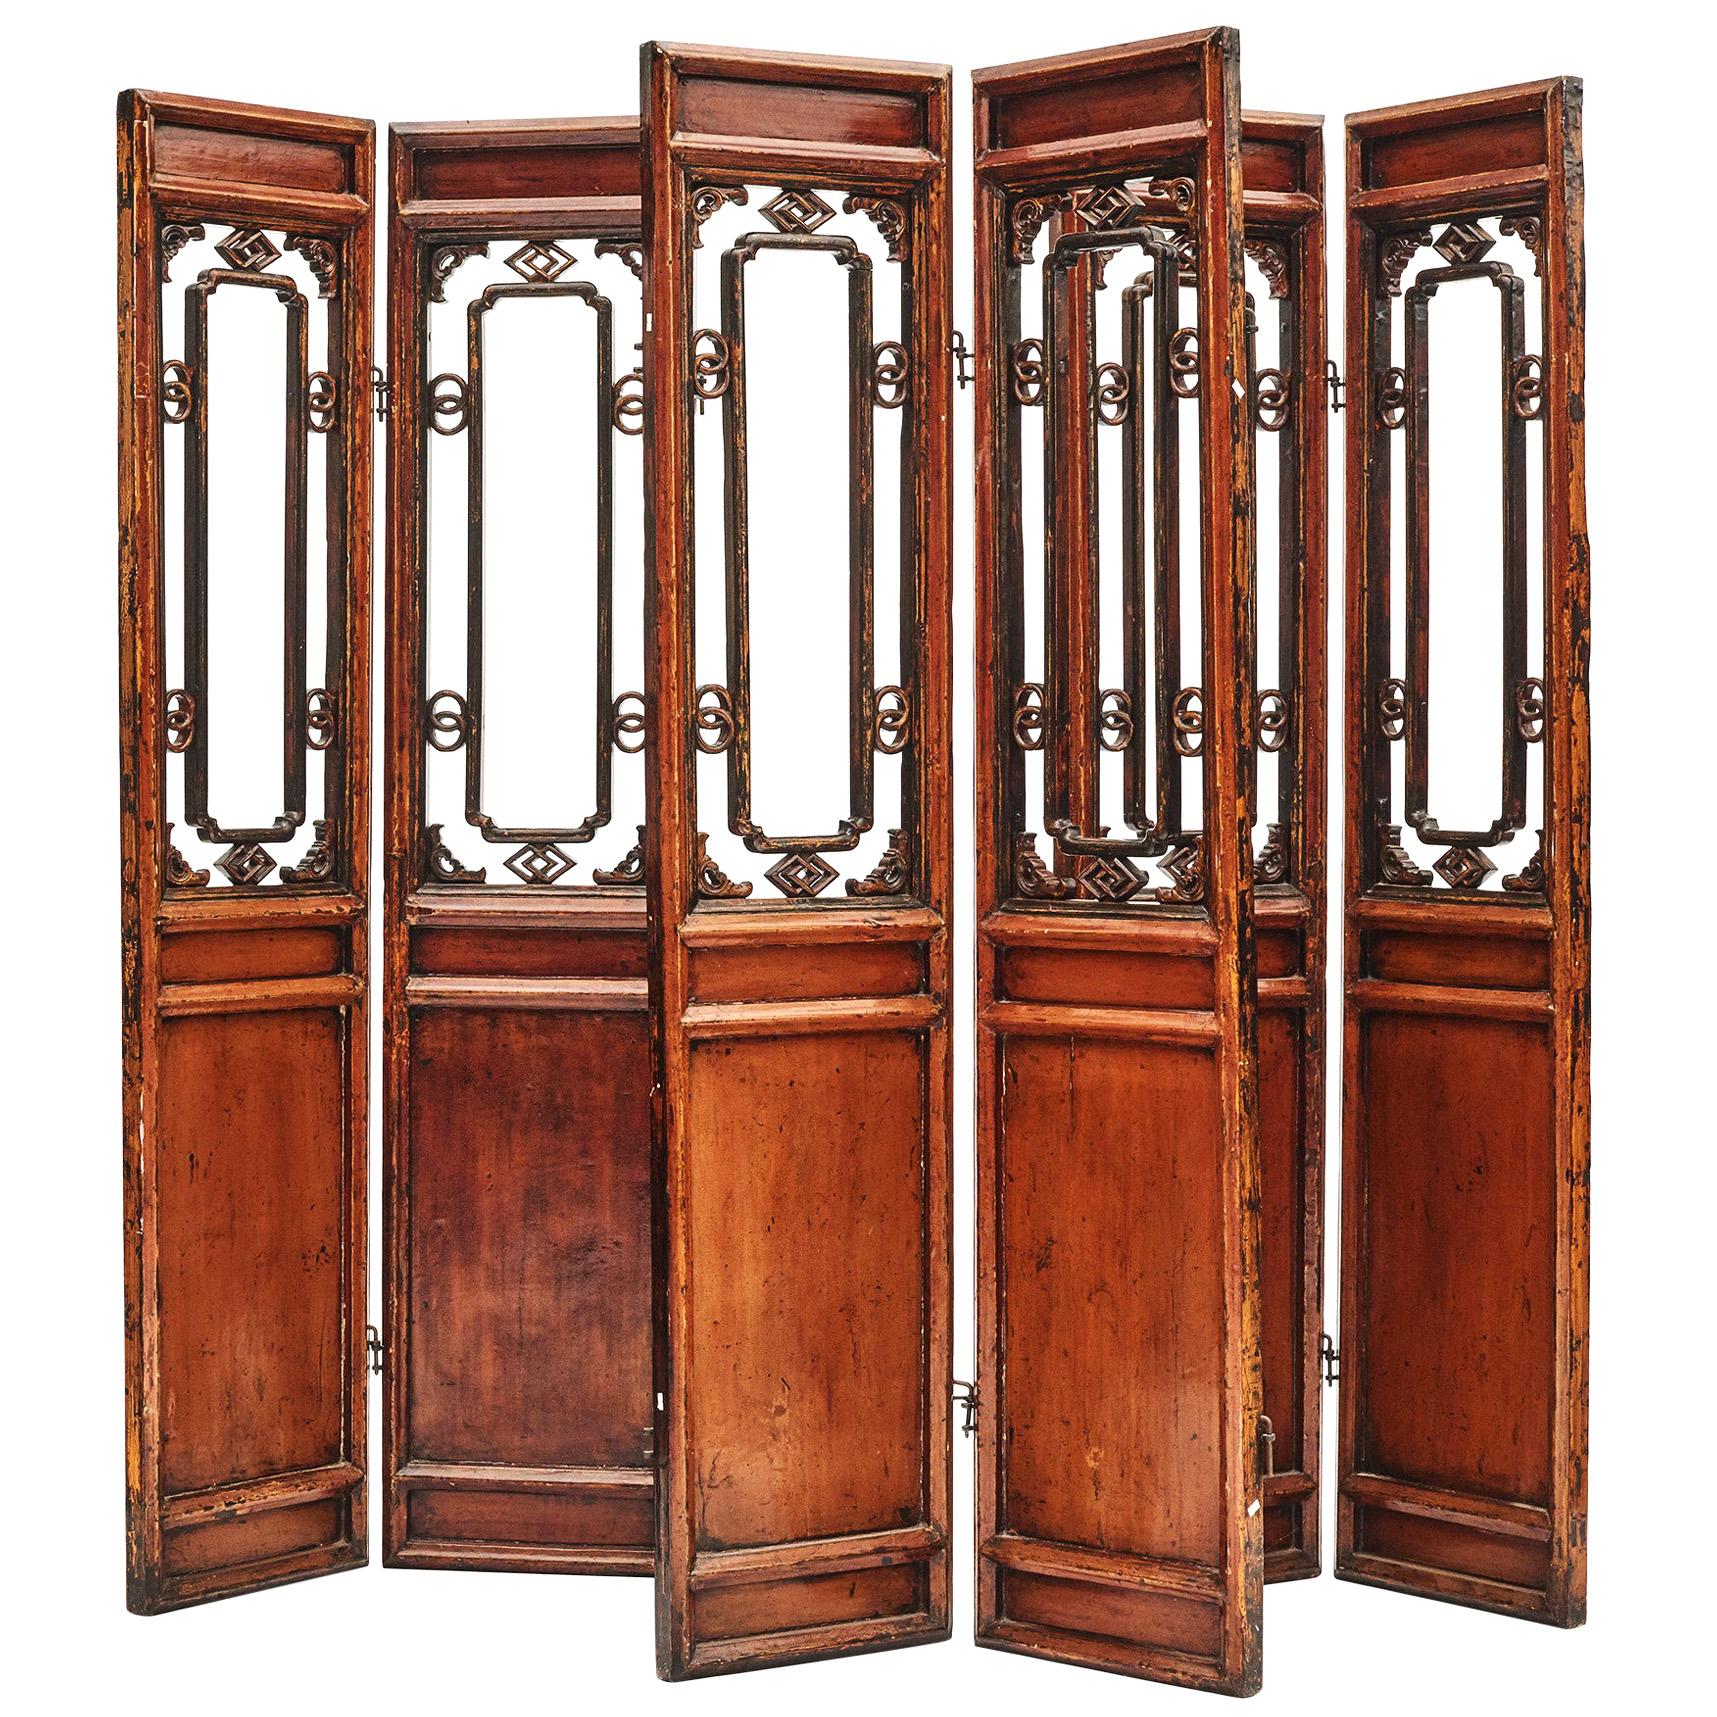 Chinese Qing Six-Panel Screen / Room Divider